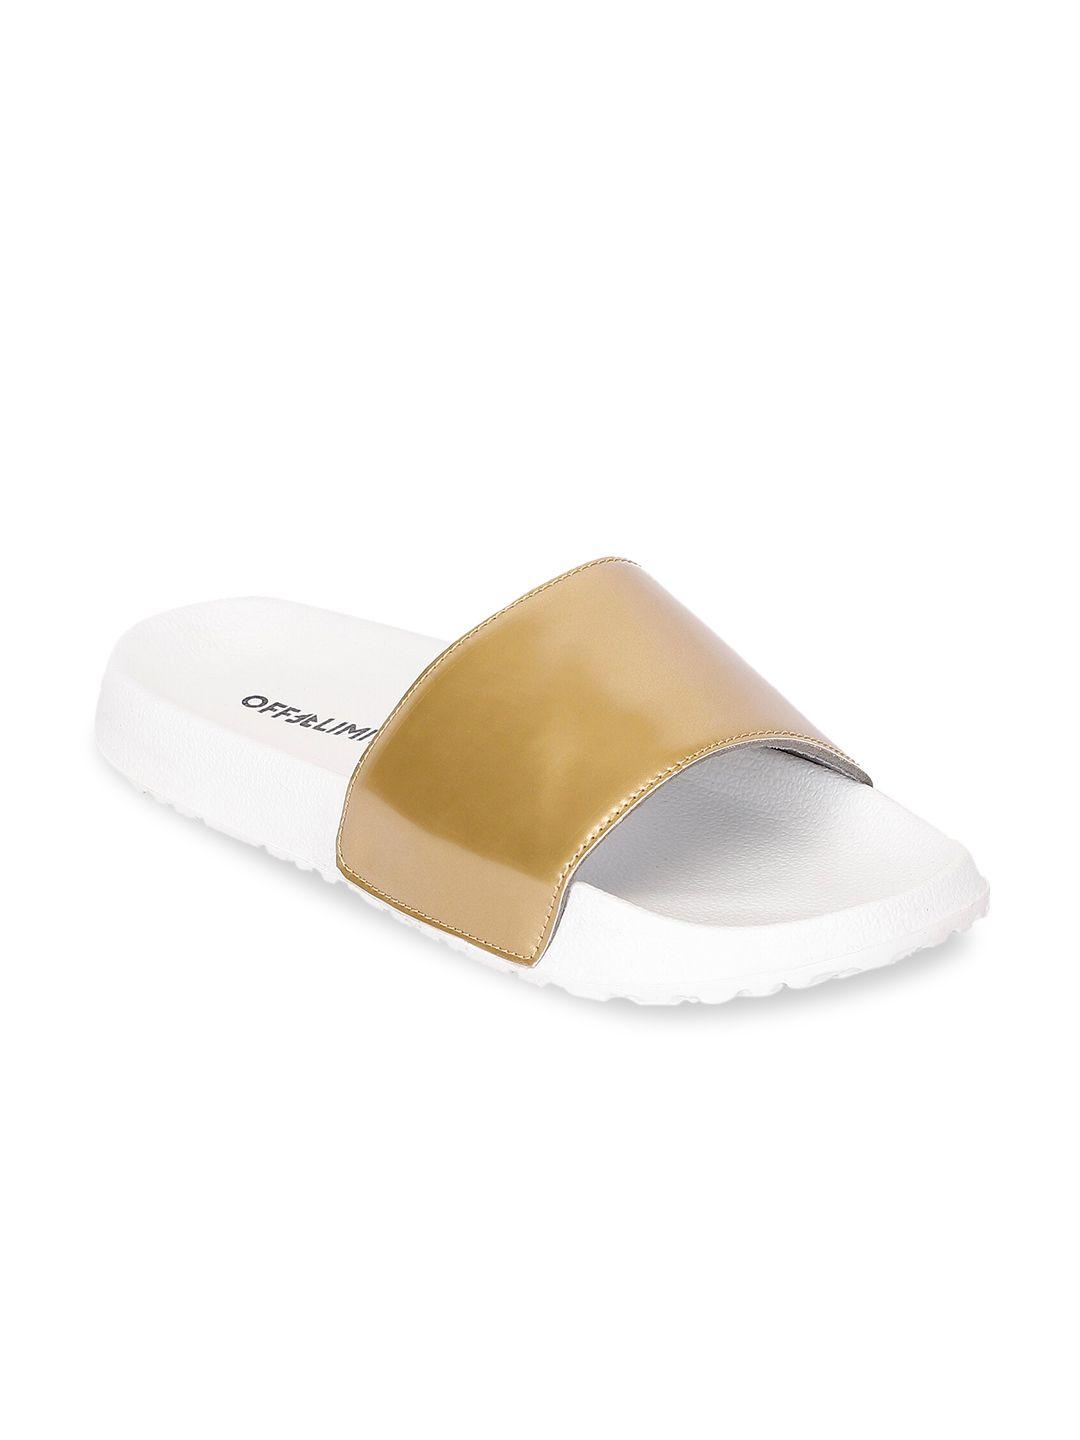 off-limits-women-gold-toned-solid-sliders